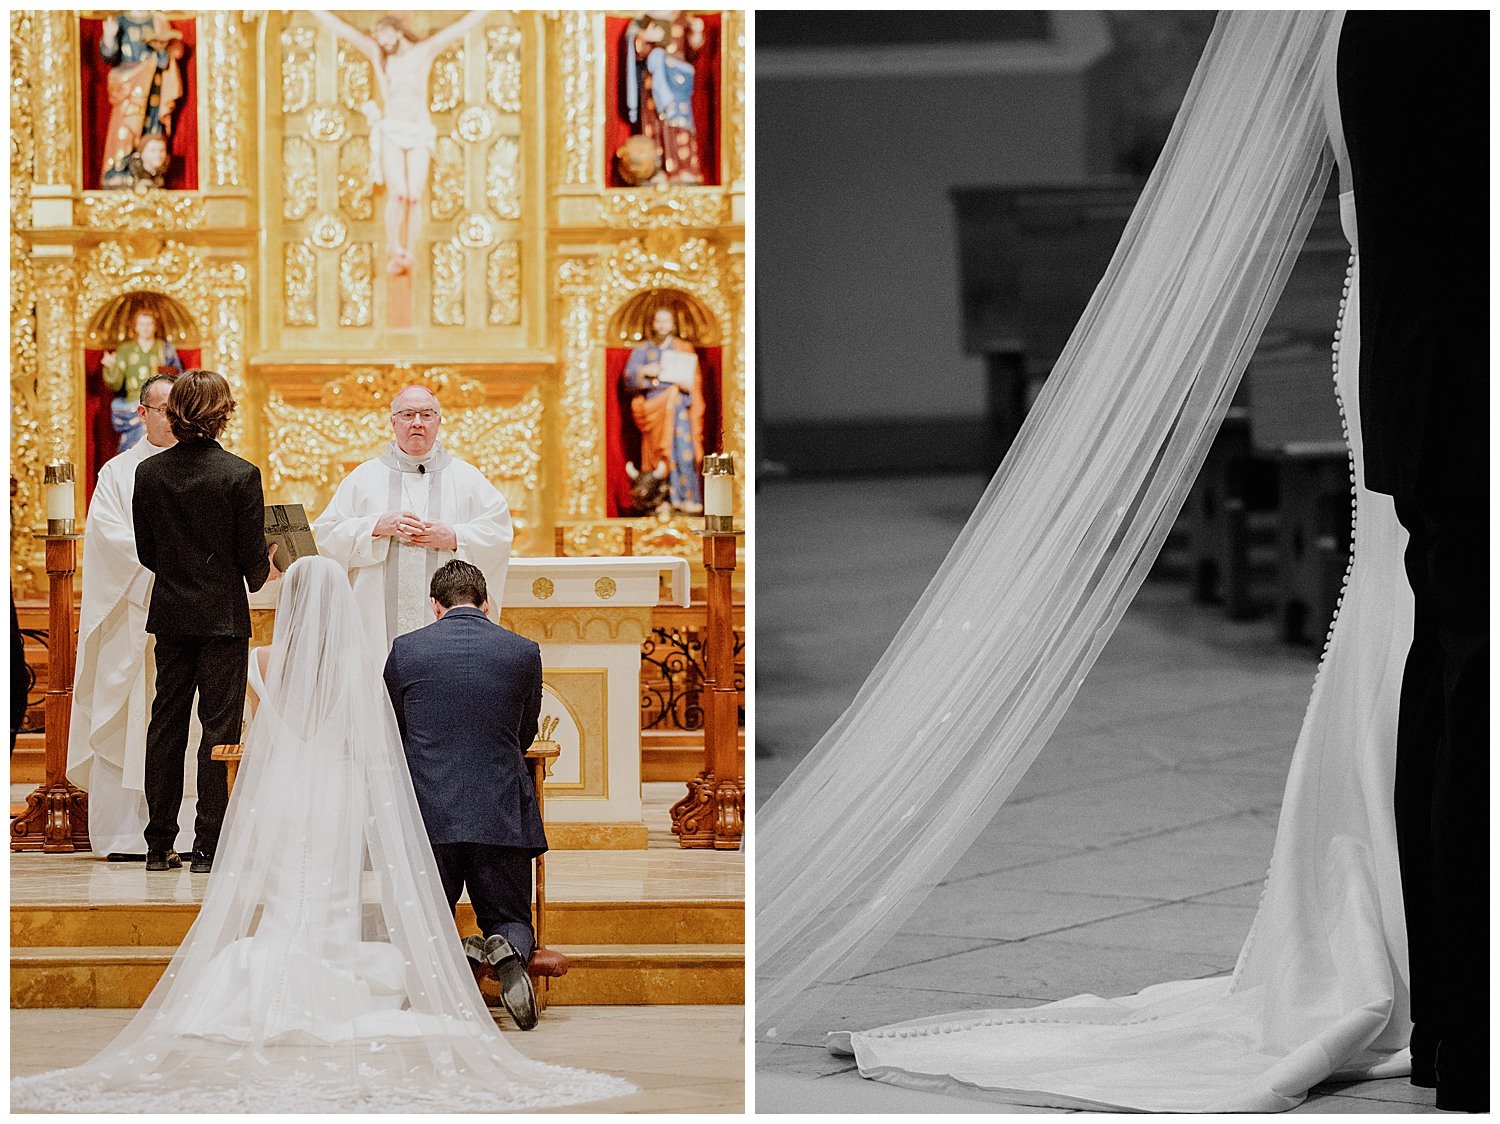 Two photos side by side show the couple kneeling during a catholic wedding ceremony and a close up of the wedding veil